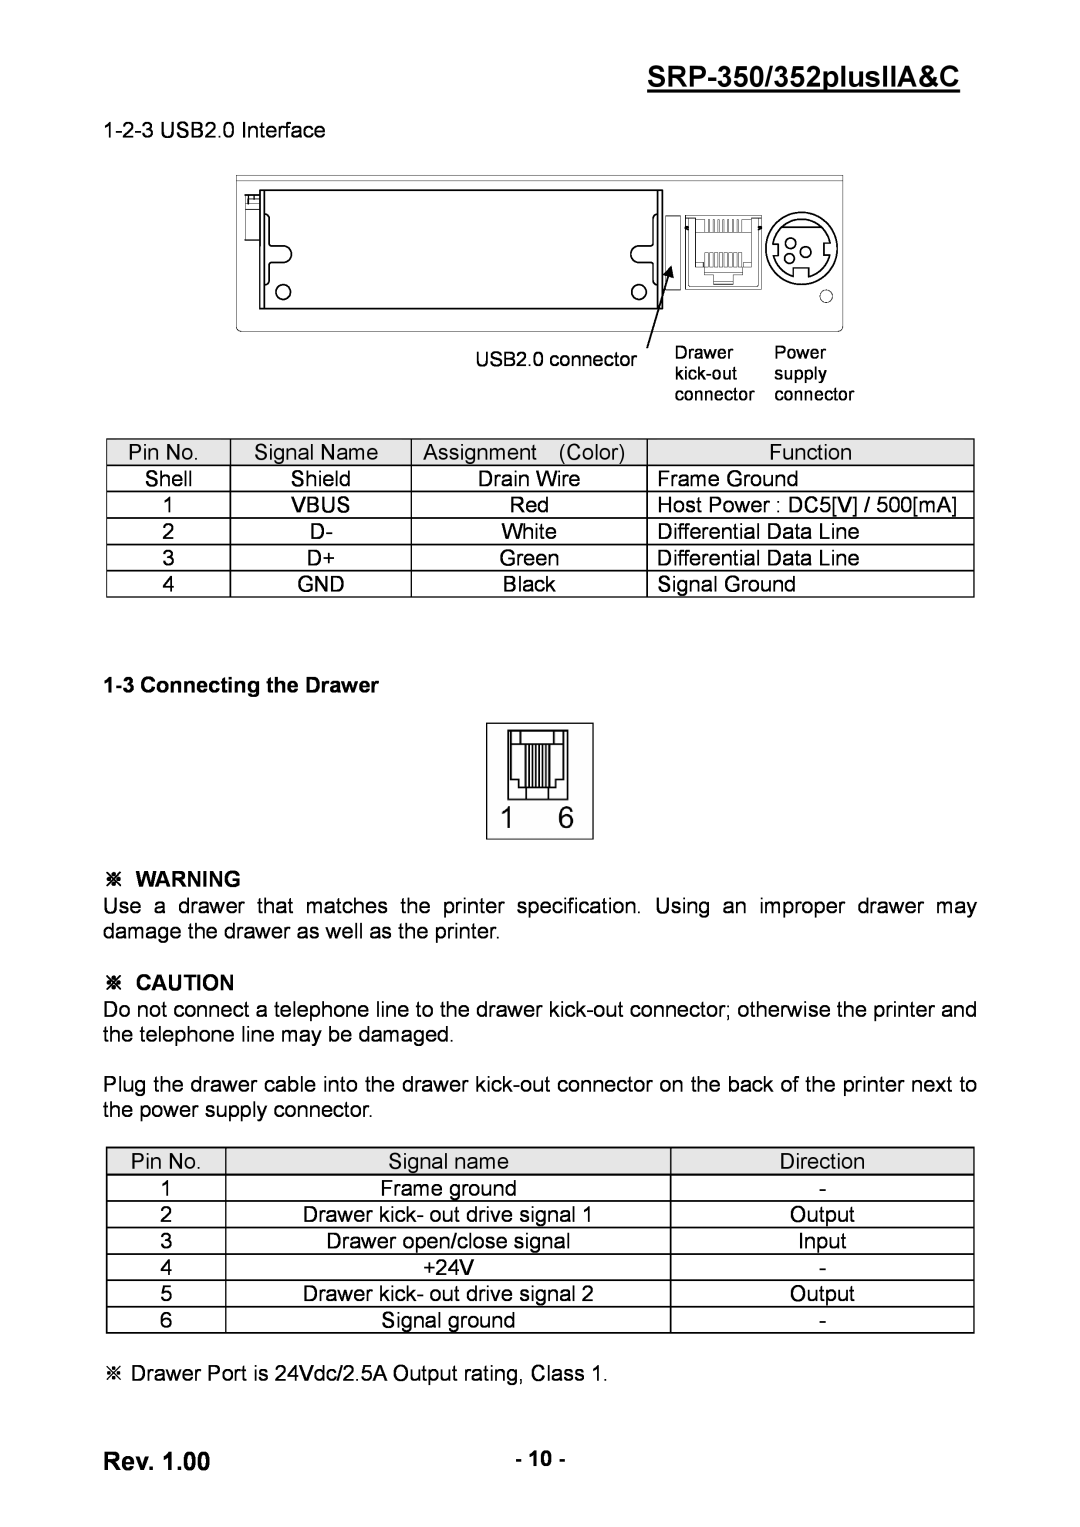 BIXOLON SRP-352 user manual Connecting the Drawer ※ WARNING, ※ Caution, SRP-350/352plusIIA&C, USB2.0 connector, +24V 